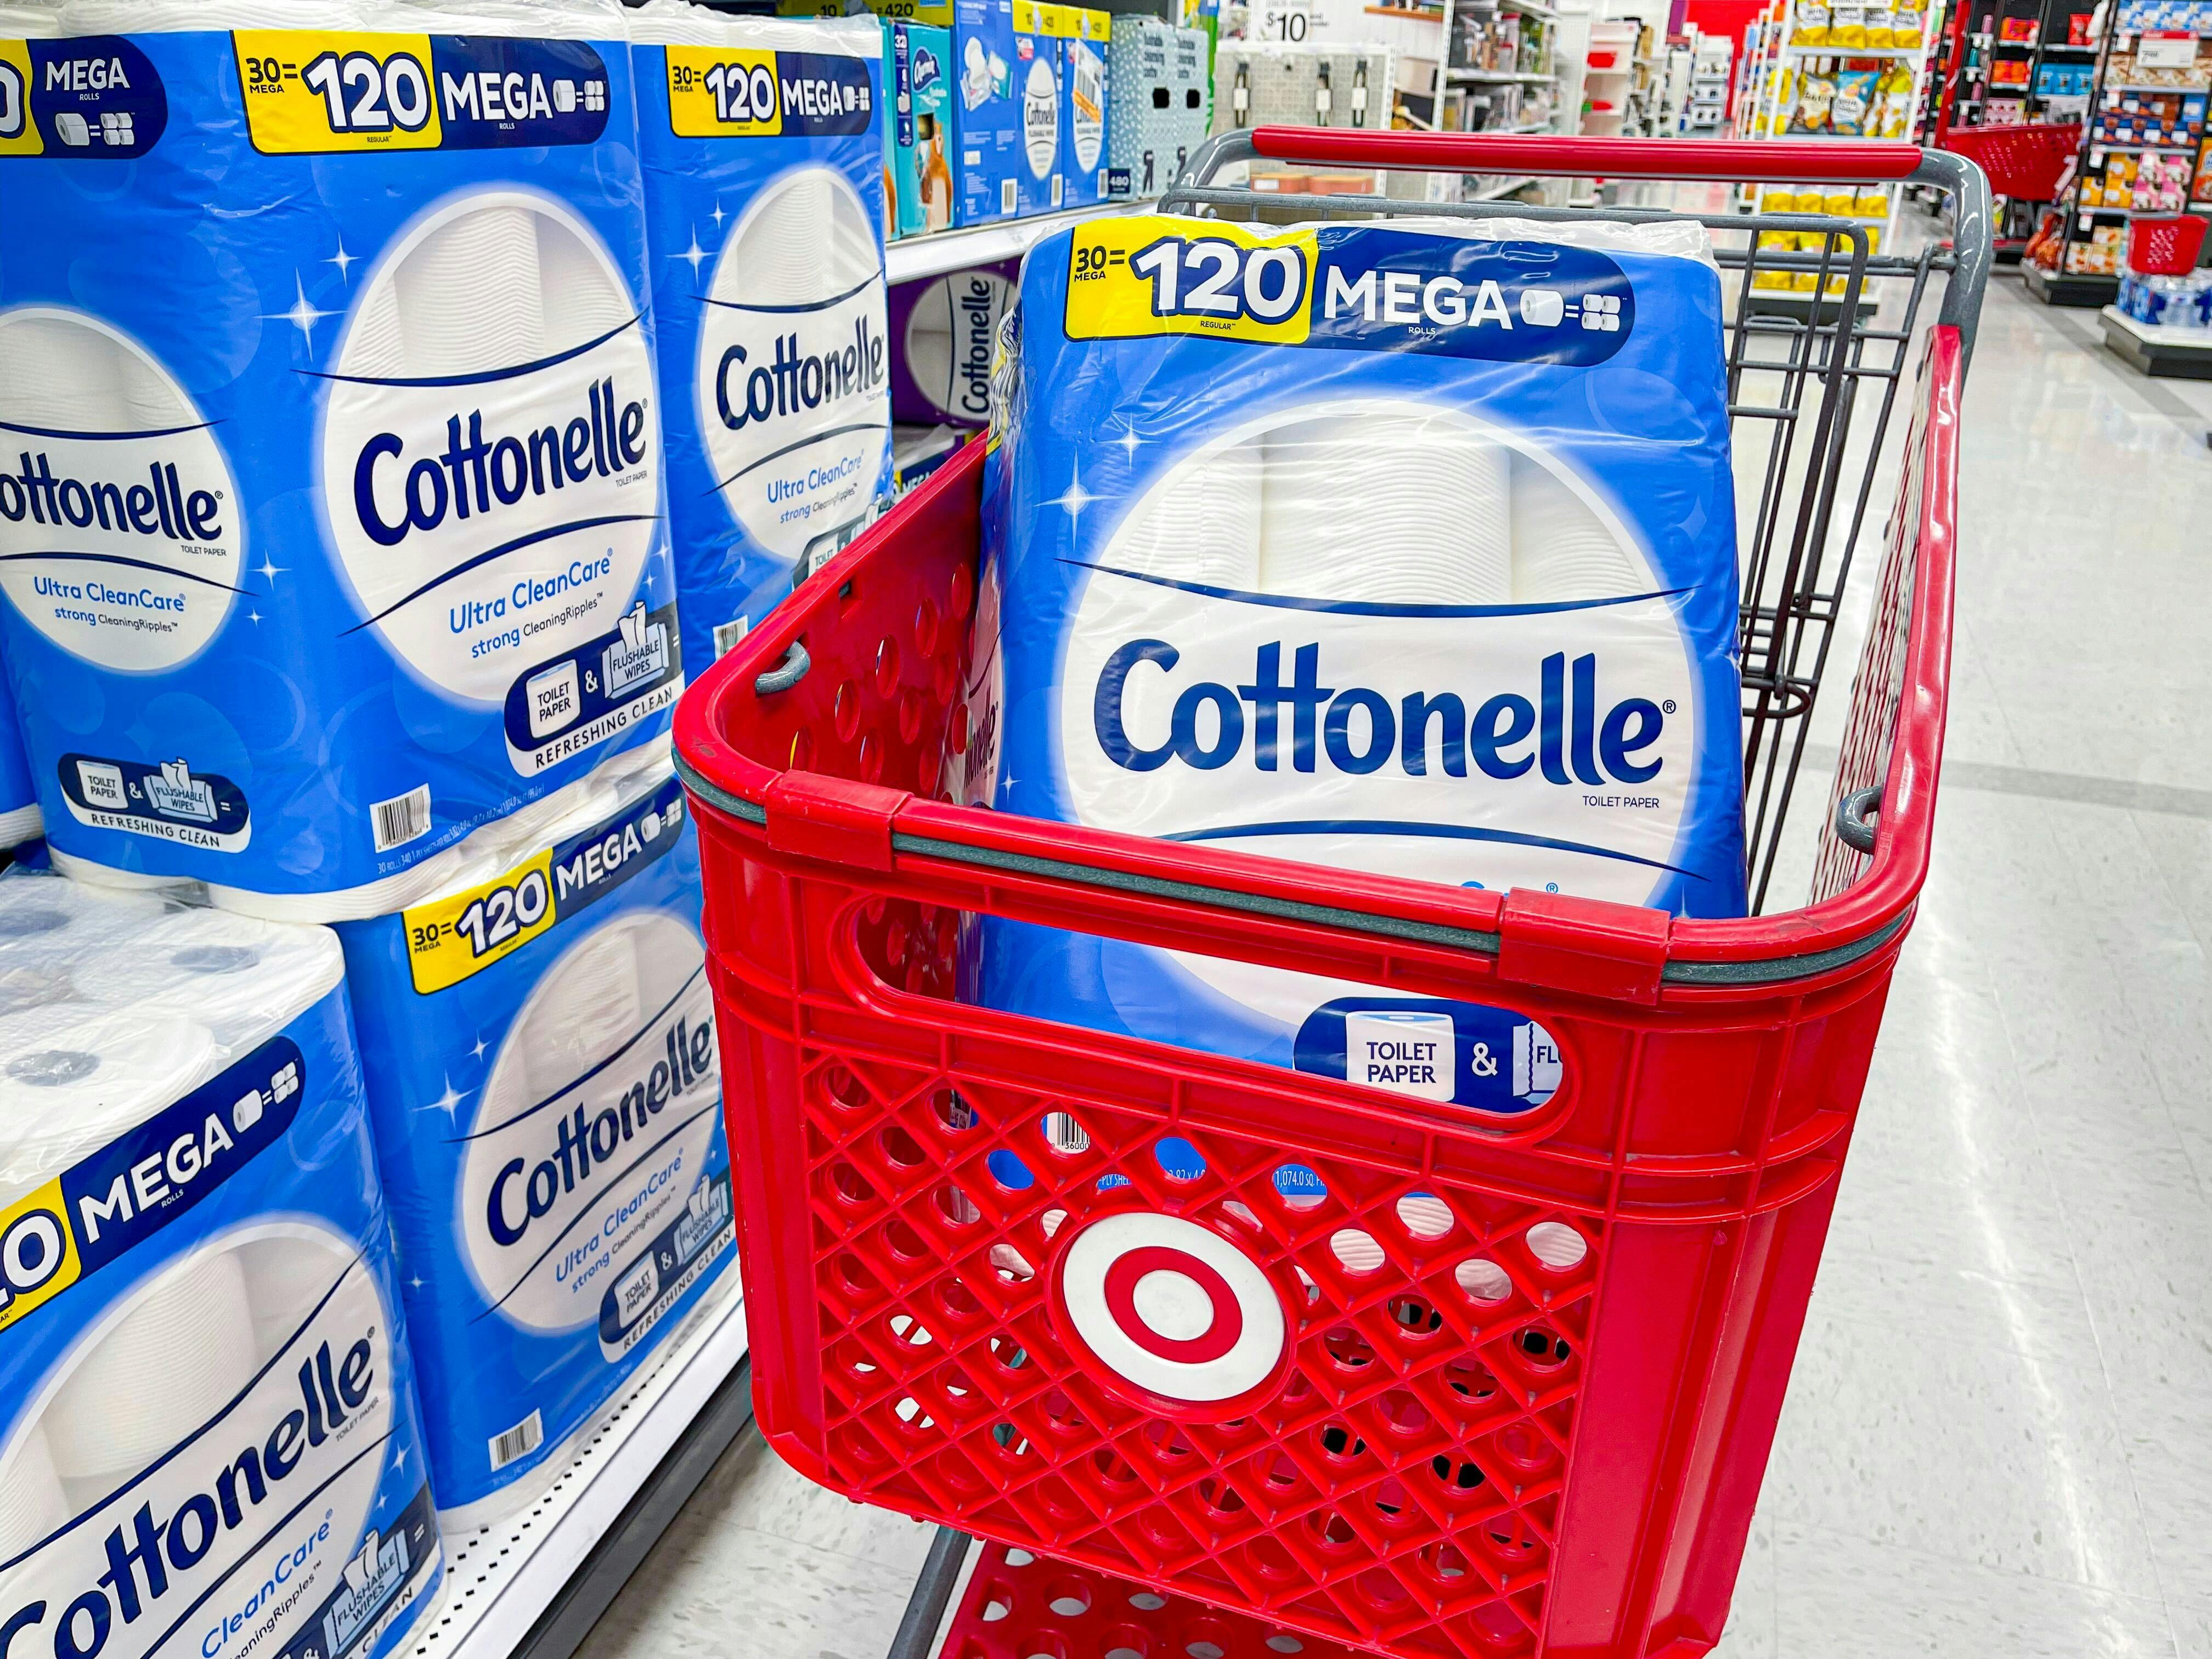 One pack of Cottonelle Mega toilet paper sitting in a Target shopping cart parked in an aisle next to a shelf displaying more Cottonelle toilet paper packs.